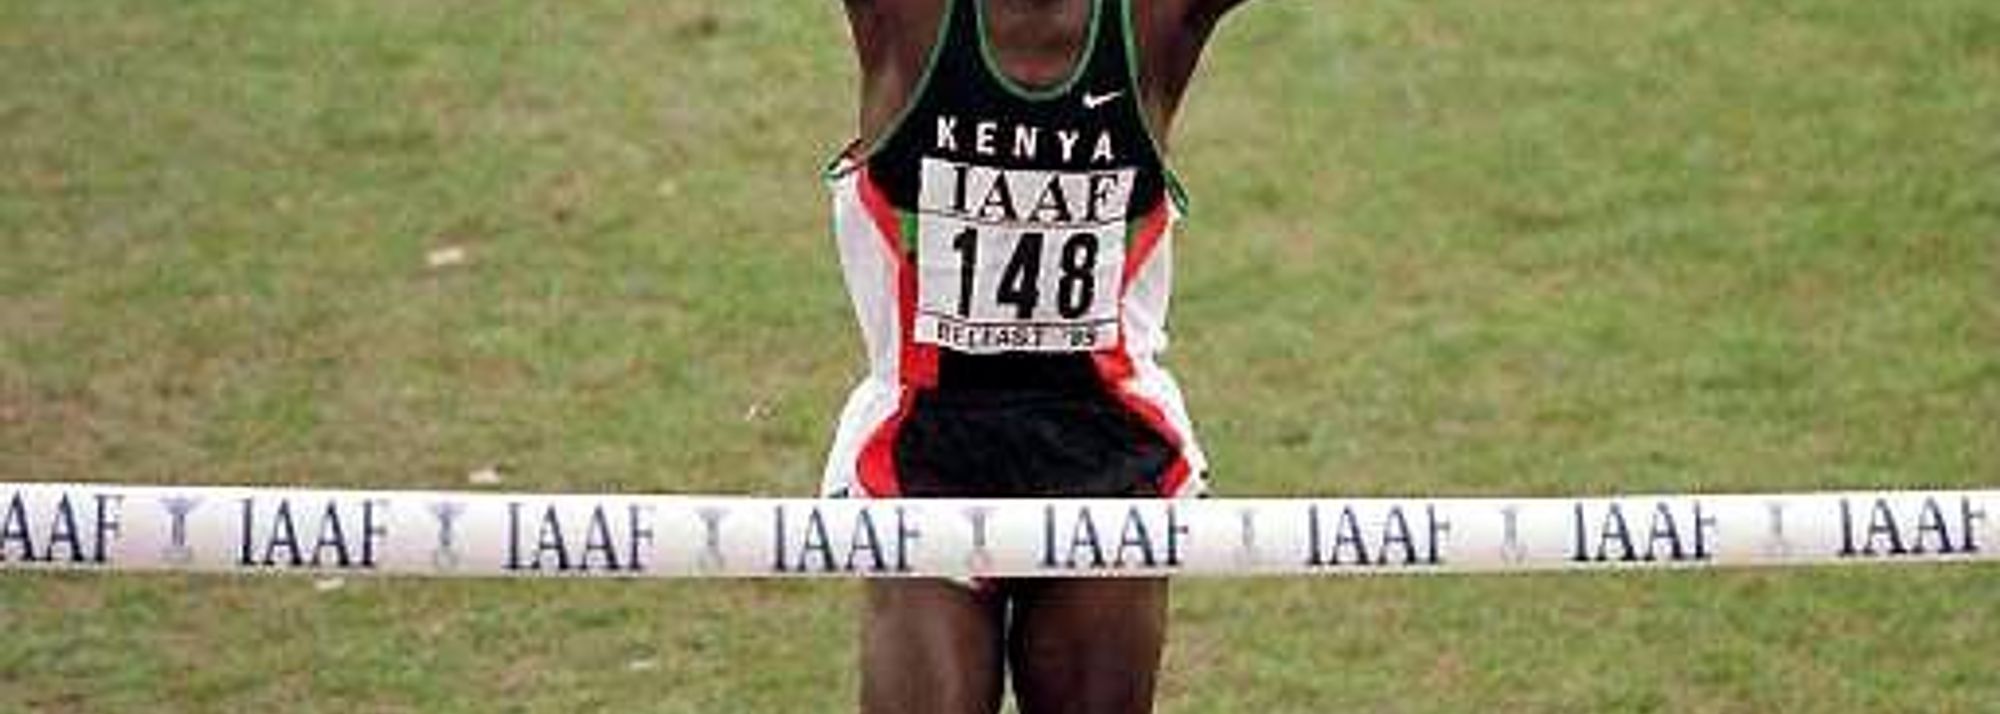 Benjamin Limo knew what the men’s short race gold medal looked like long before it was hung around his neck on Saturday. The 1998 winner John Kibowen is his next door neighbour at their village just outside the Kenyan town of Eldoret. 